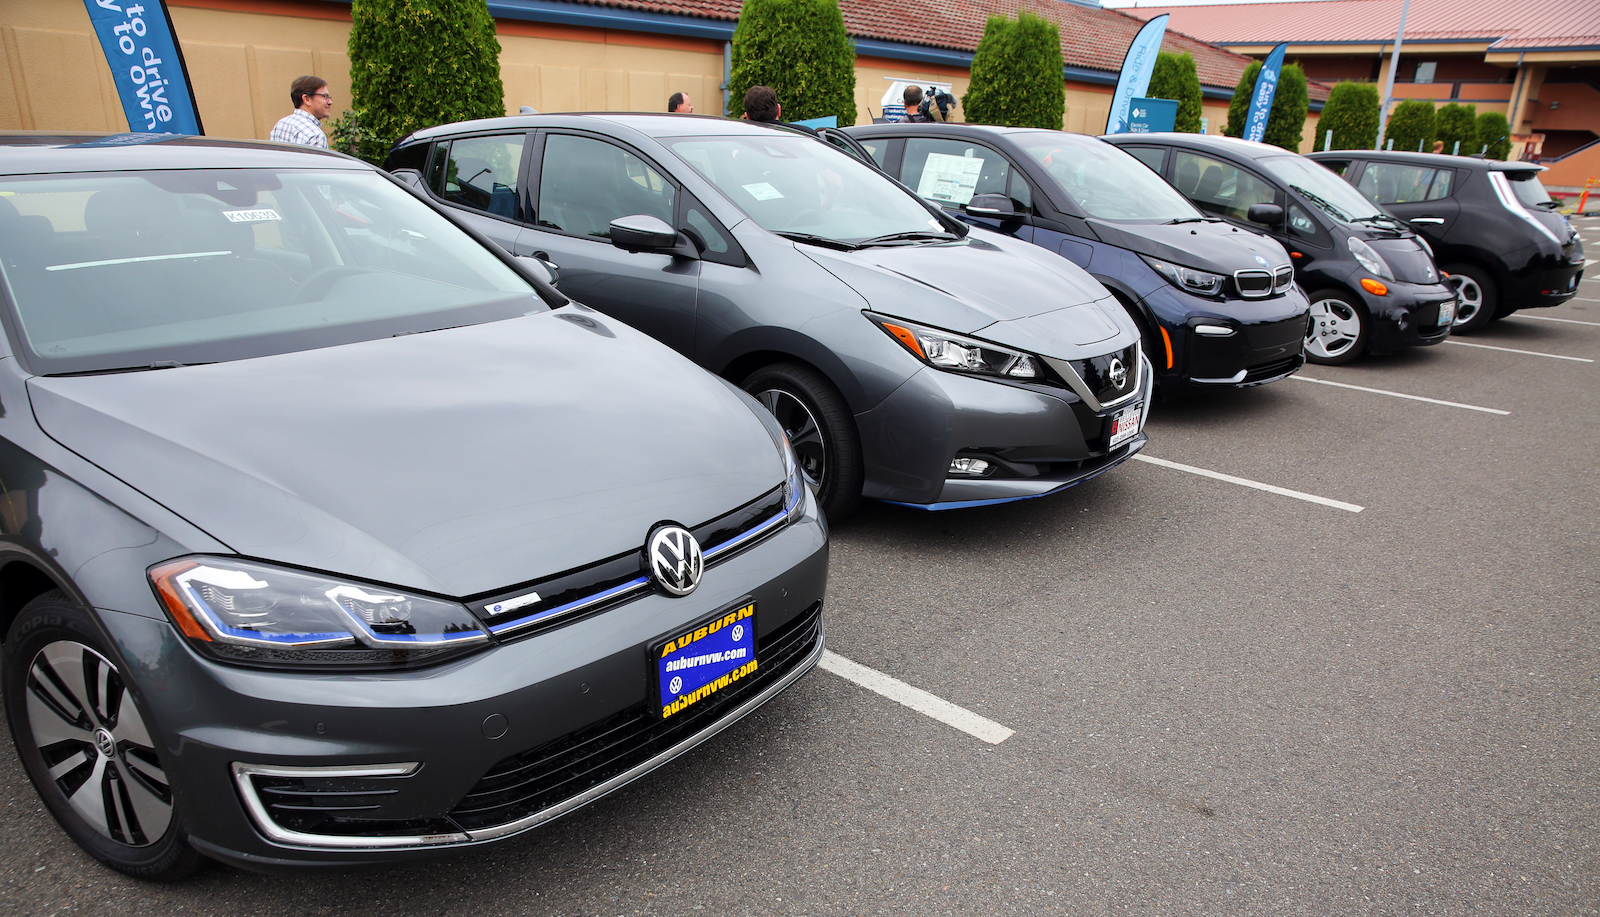 Electric cars lined up for a test drive event in Renton, Washington.